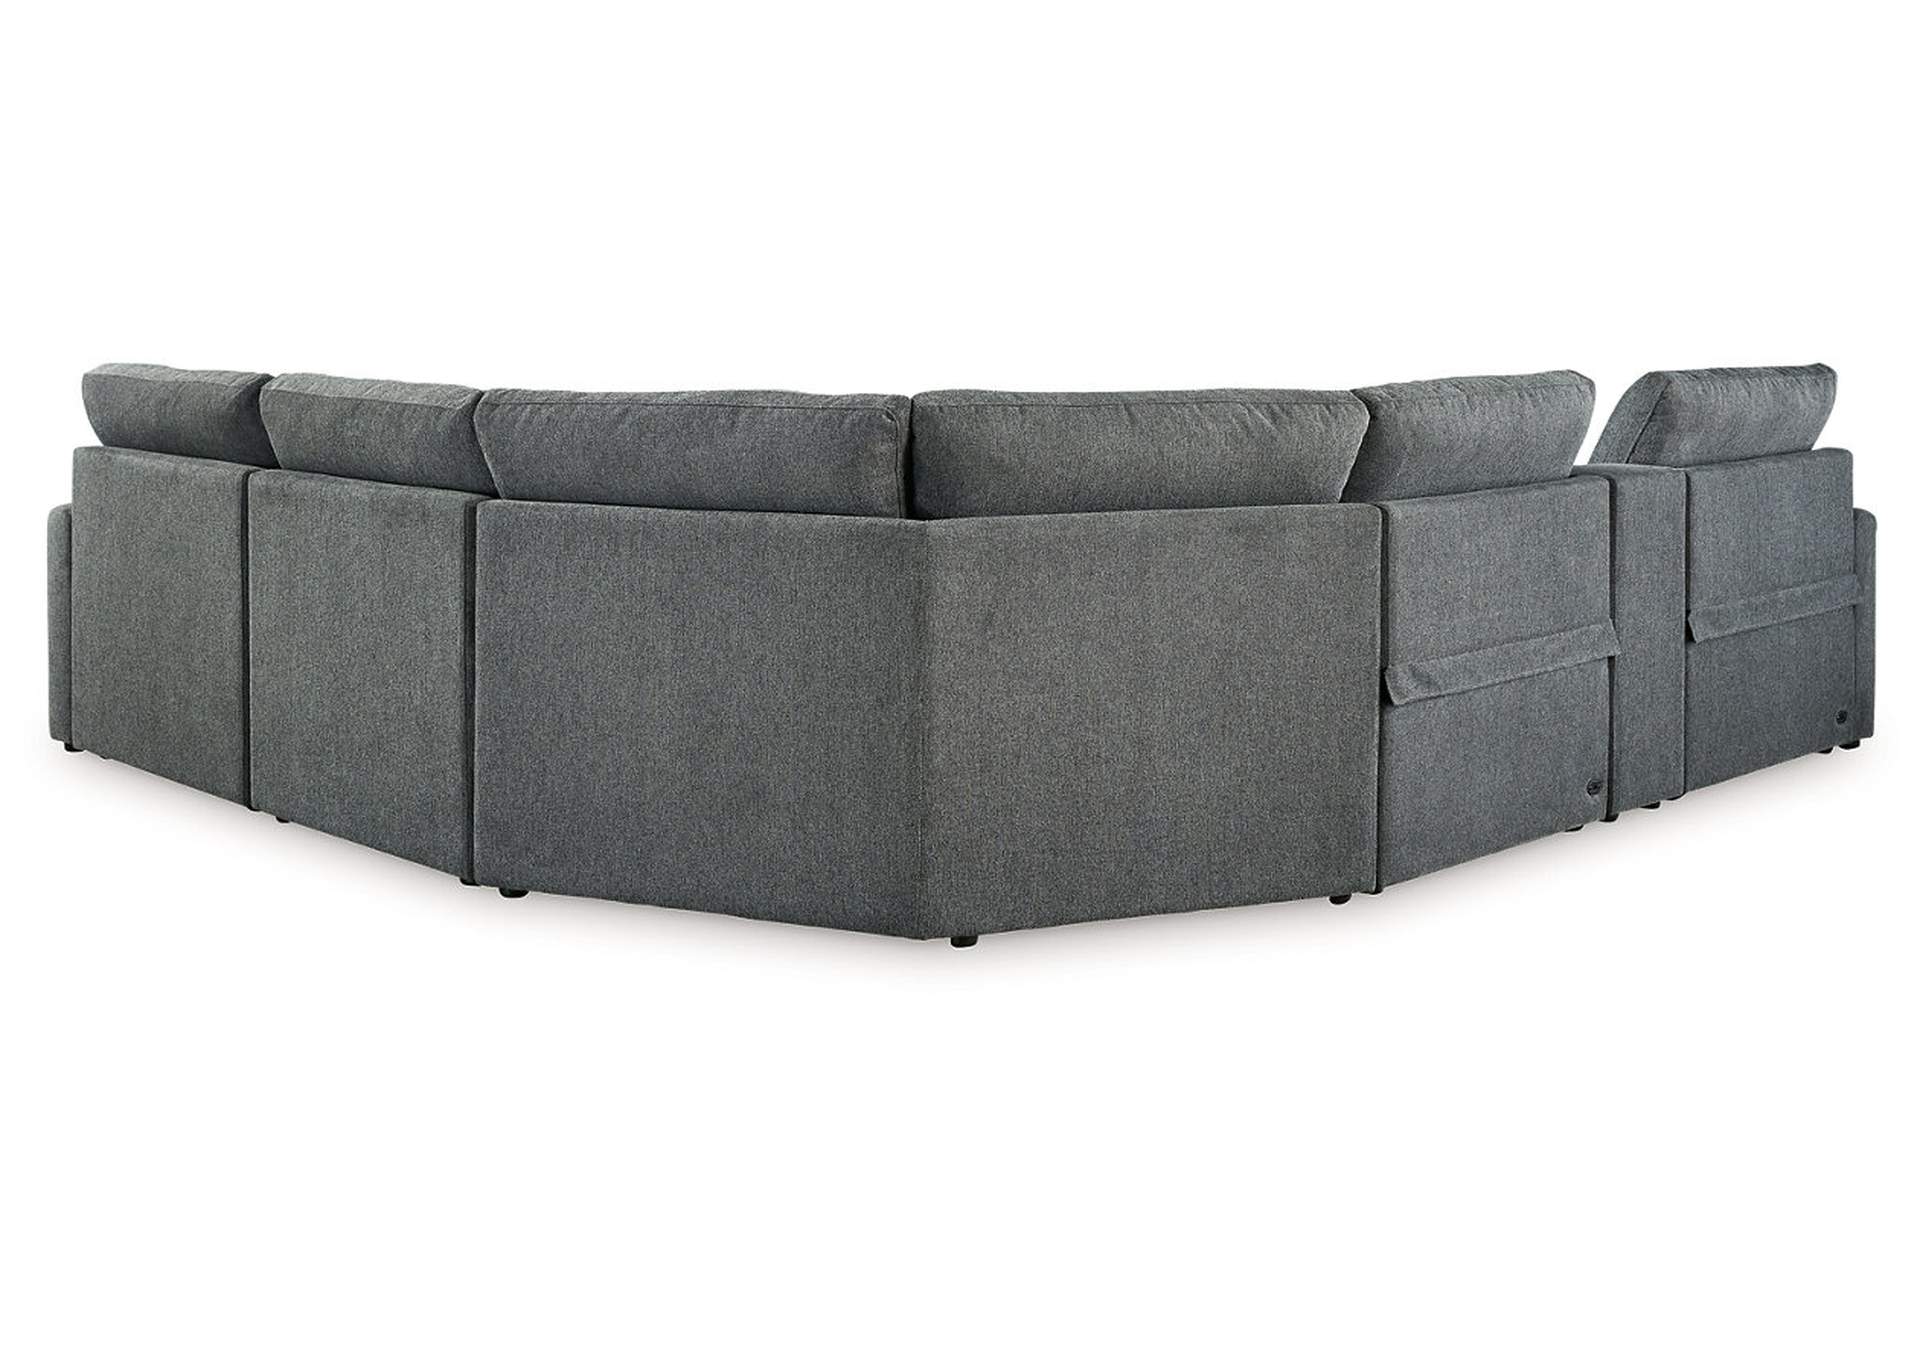 Hartsdale 6-Piece Right Arm Facing Reclining Sectional with Console and Chaise,Signature Design By Ashley